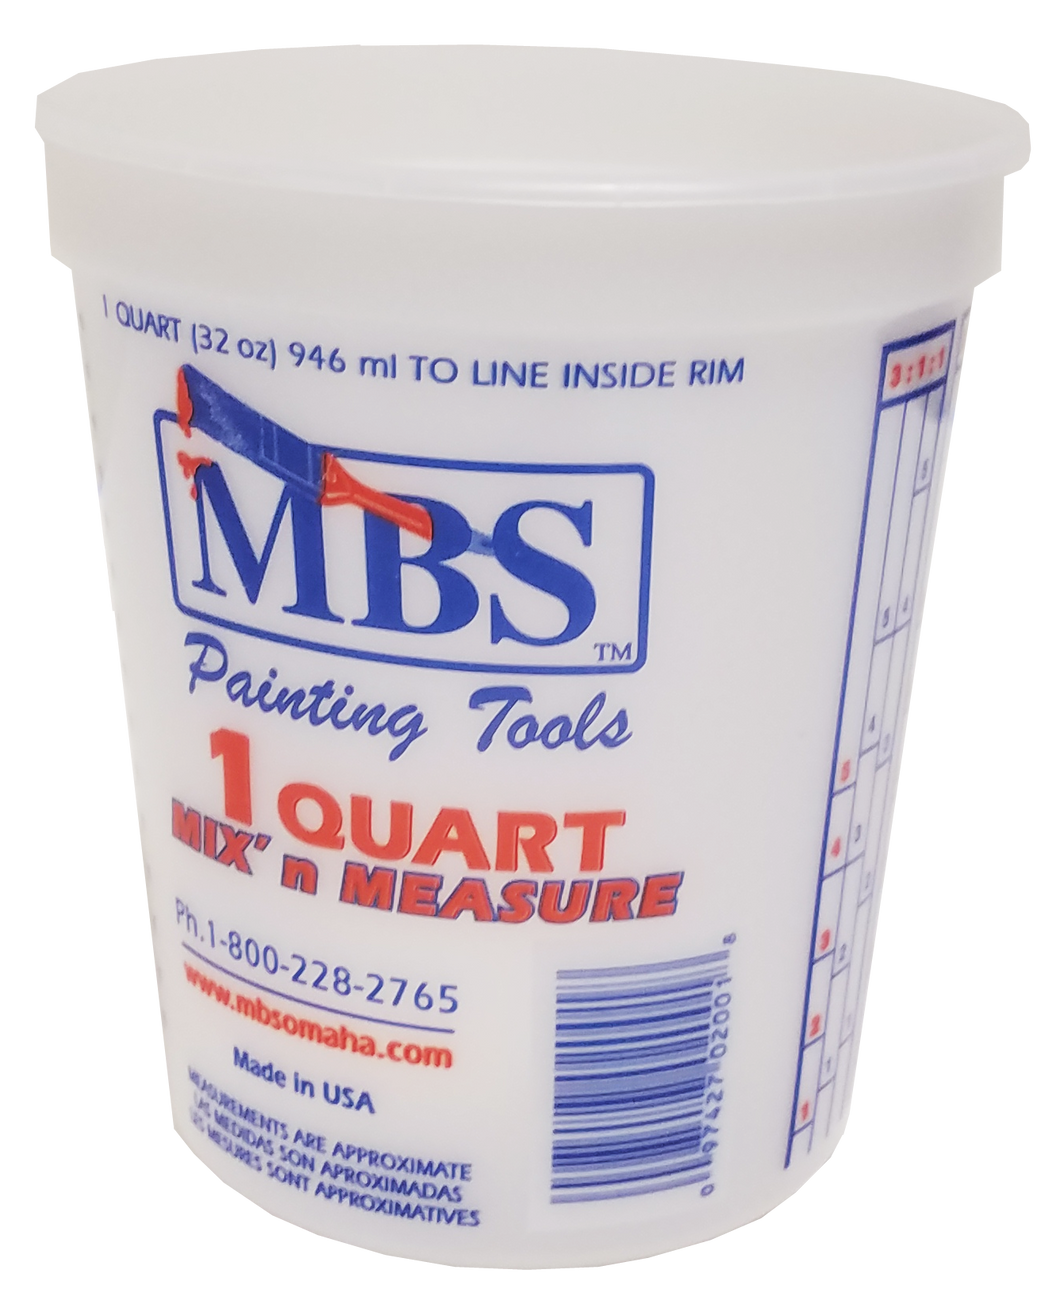 1 Quart Mix 'N Measure Bucket, Made in USA